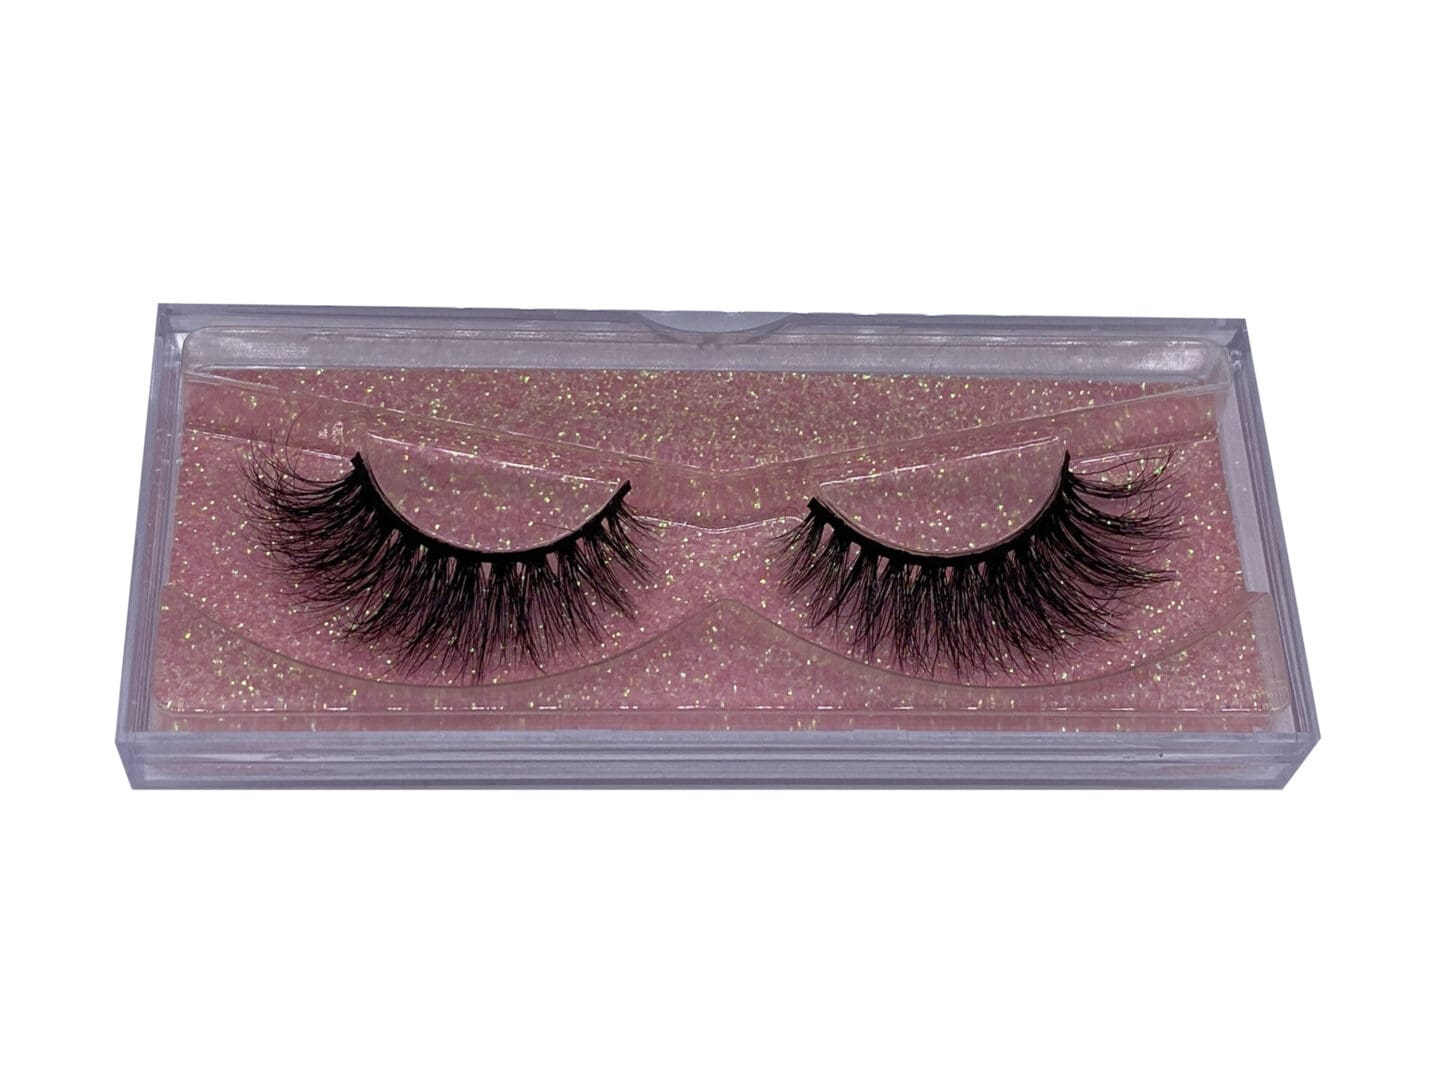 A pair of false eyelashes in pink glitter storage